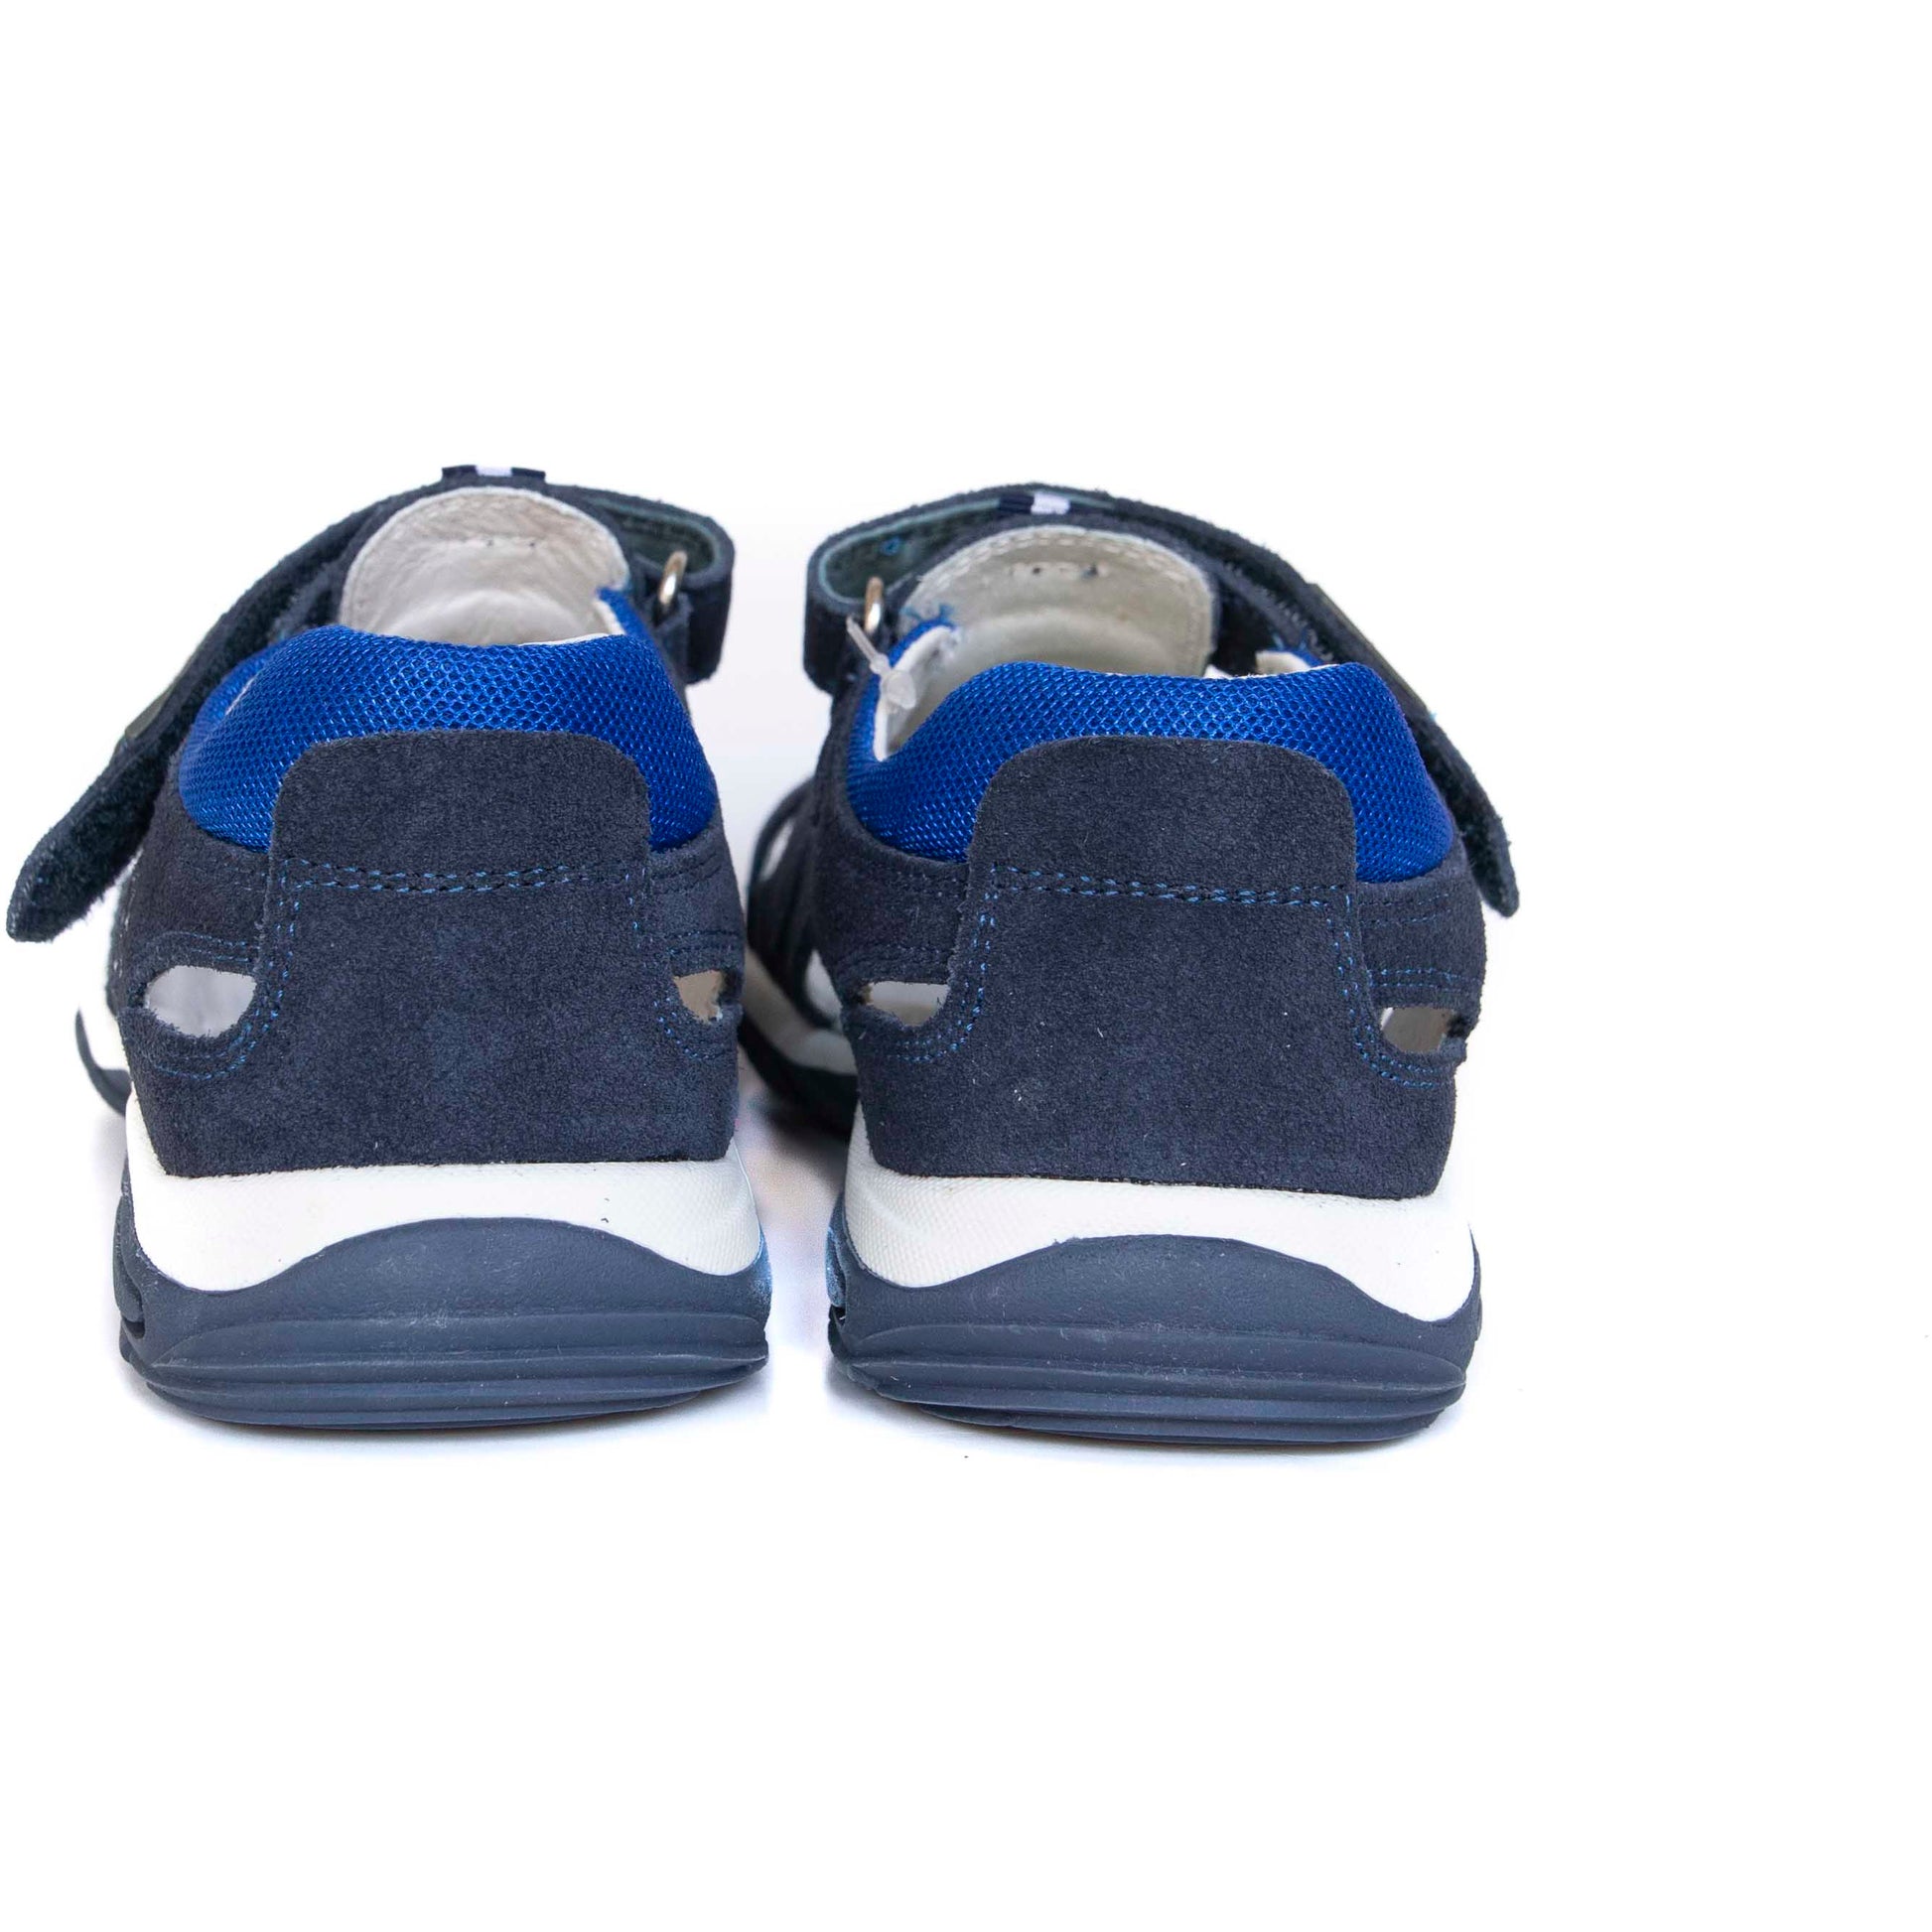 AKRON older boys arch support sandals - feelgoodshoes.ae